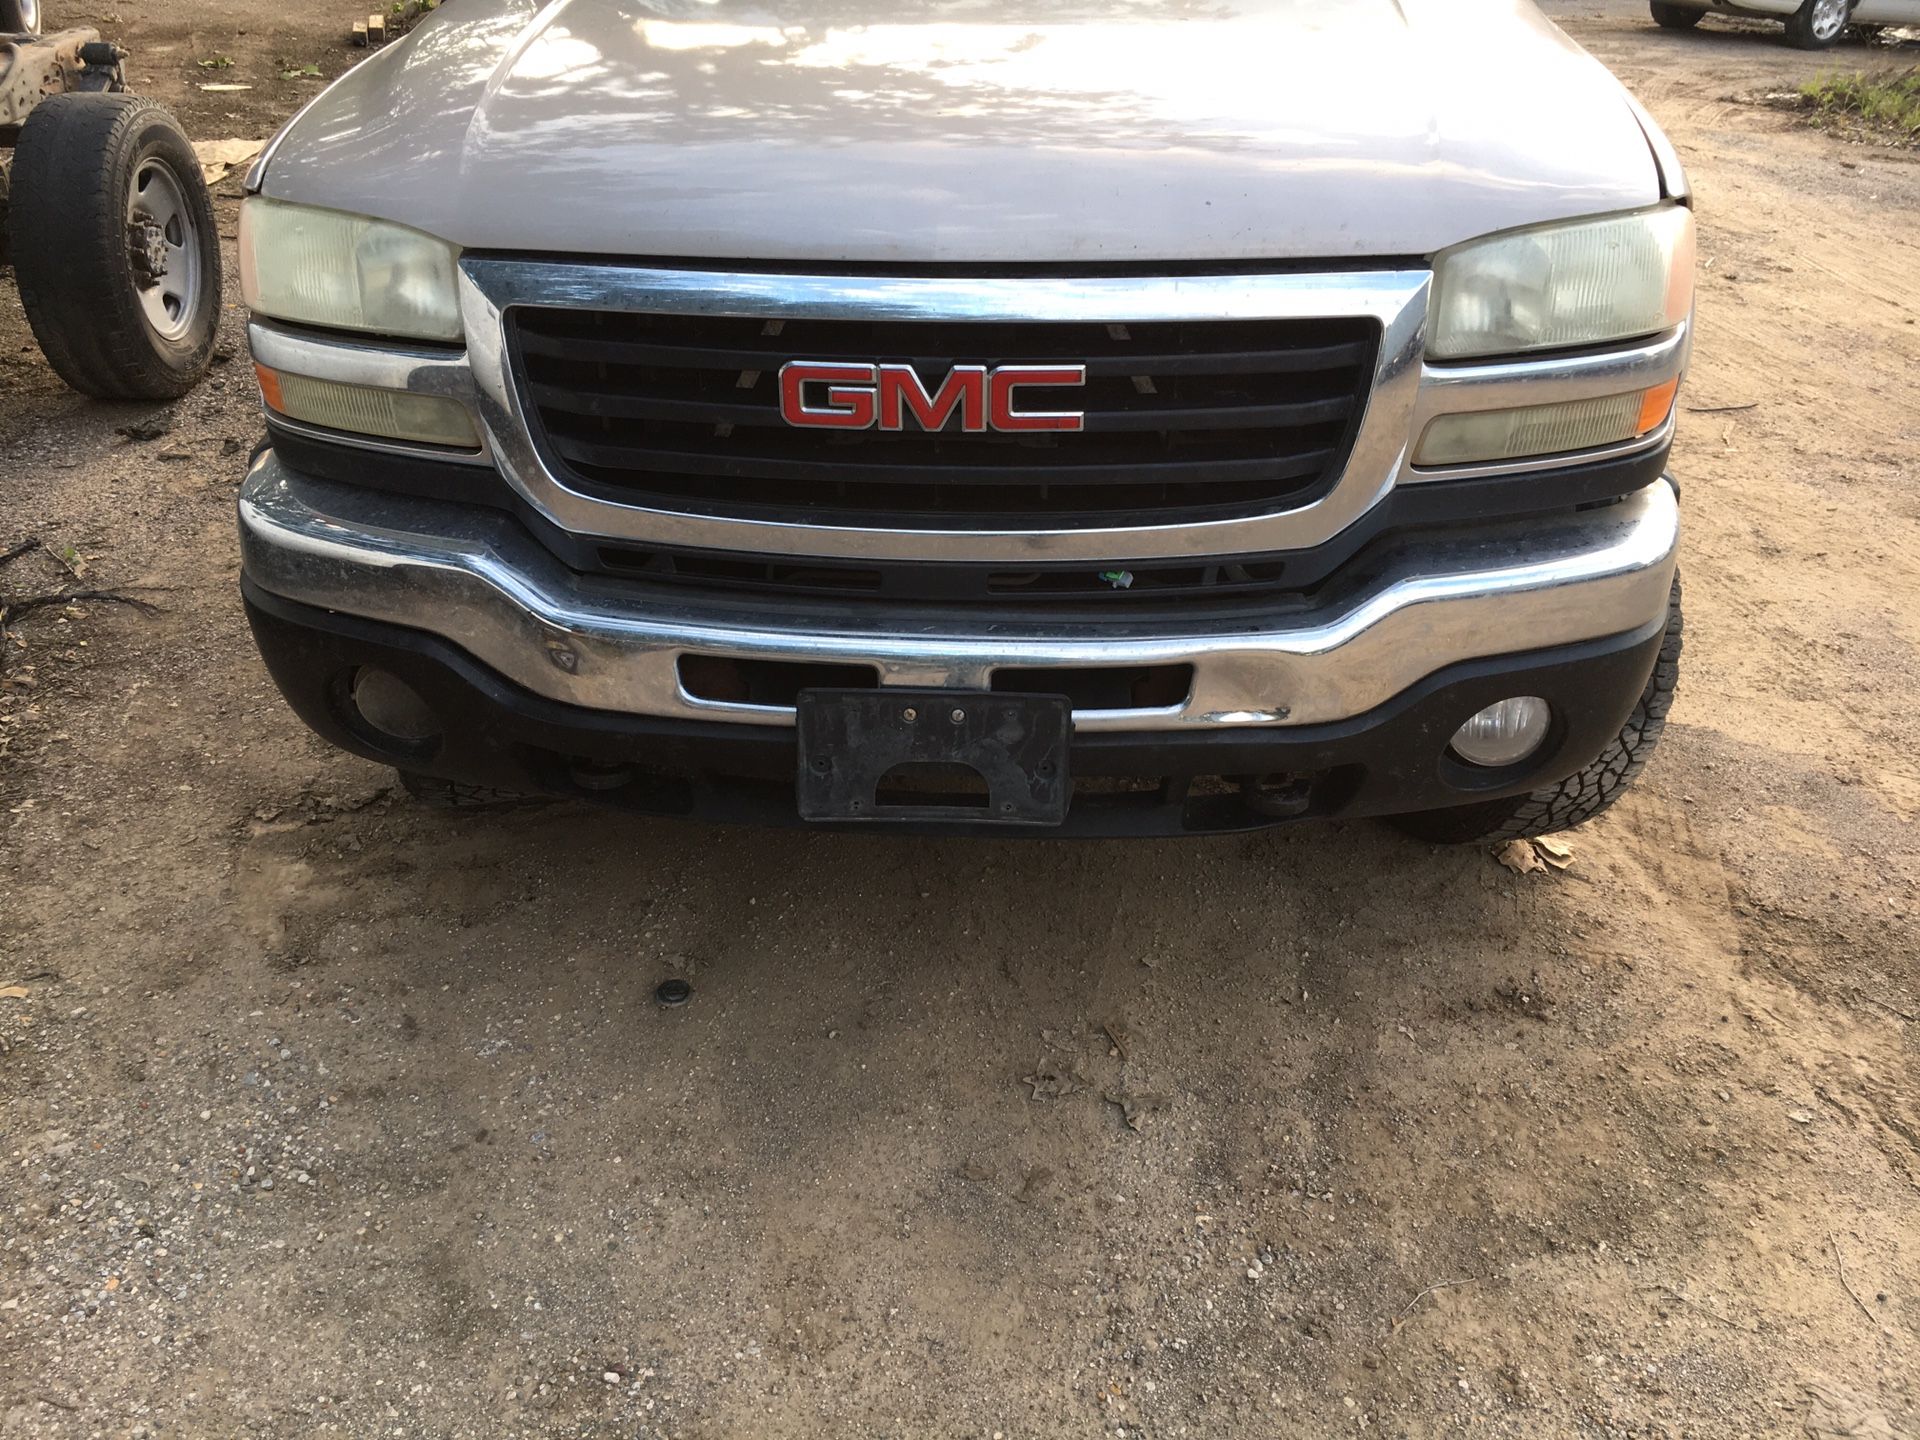 04 GMC Sierra Parting out